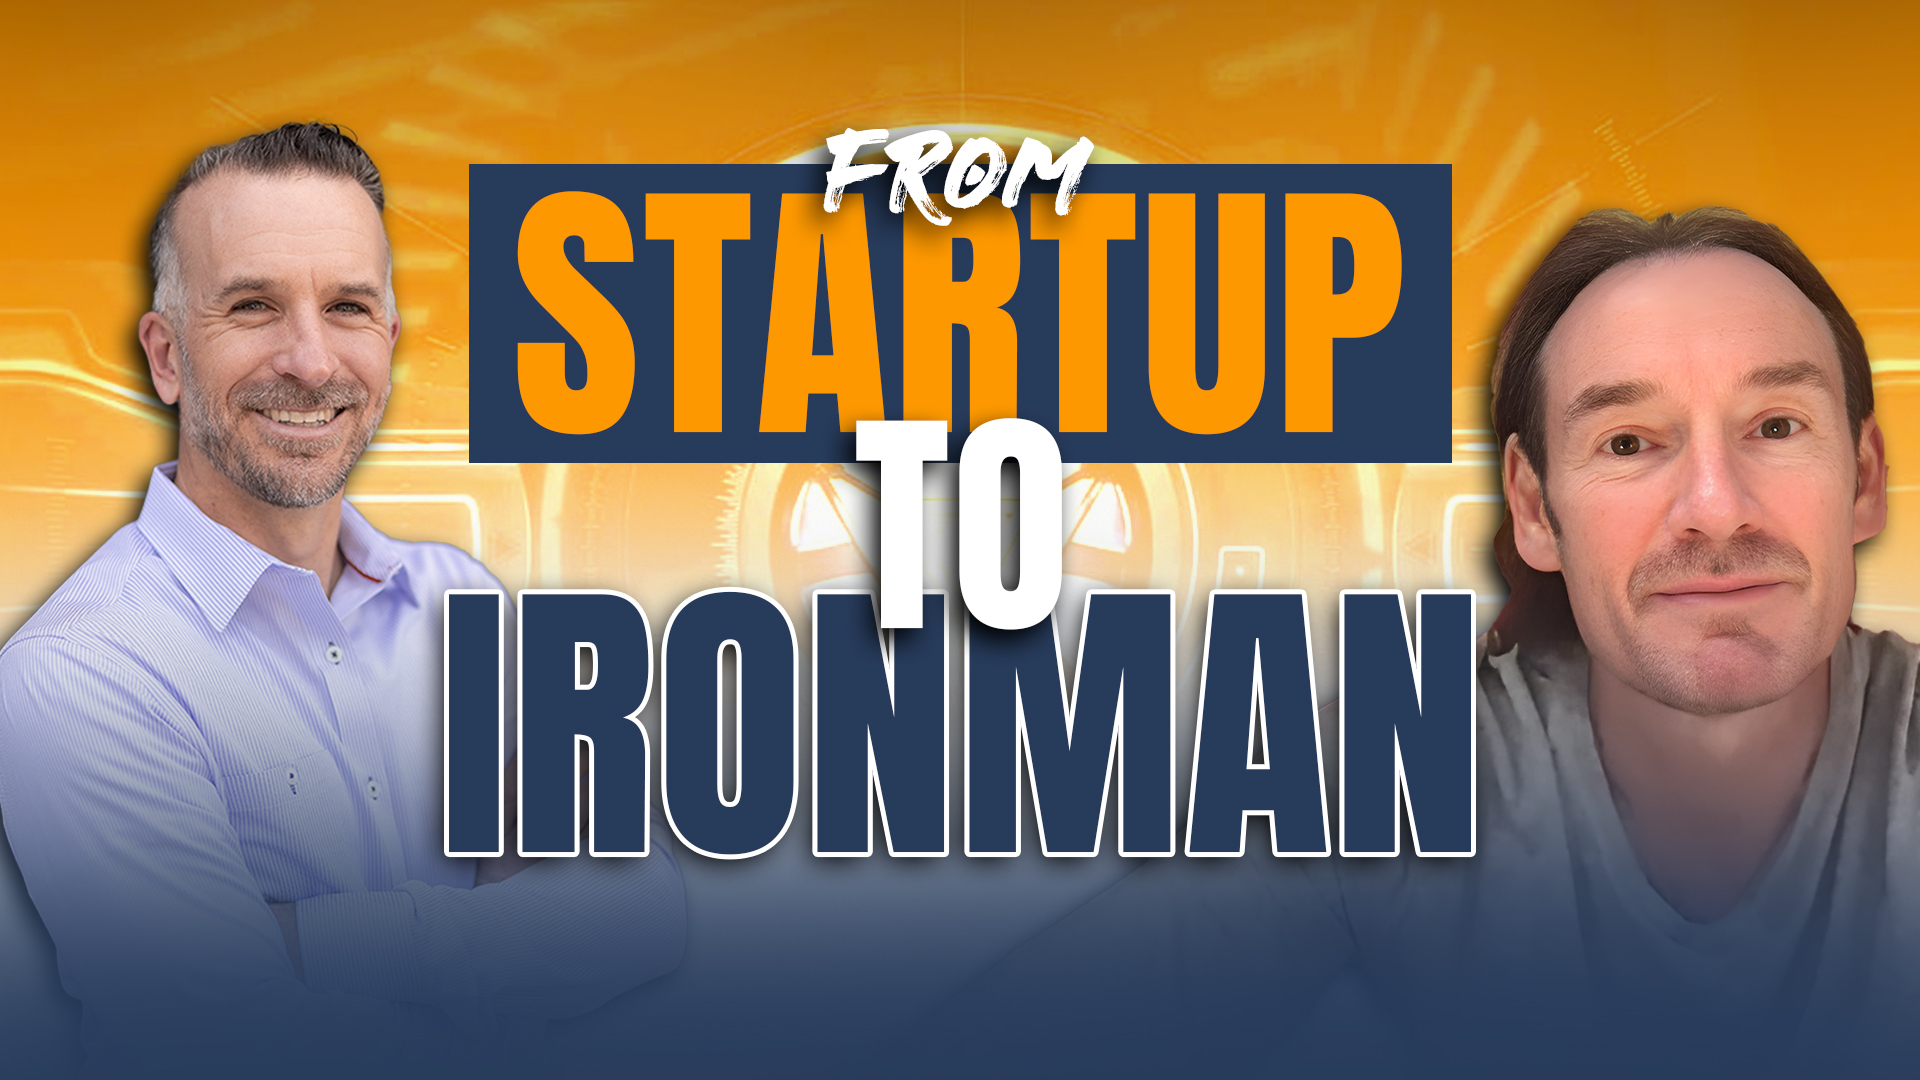 Flow Over Fear: From Startup To Ironman